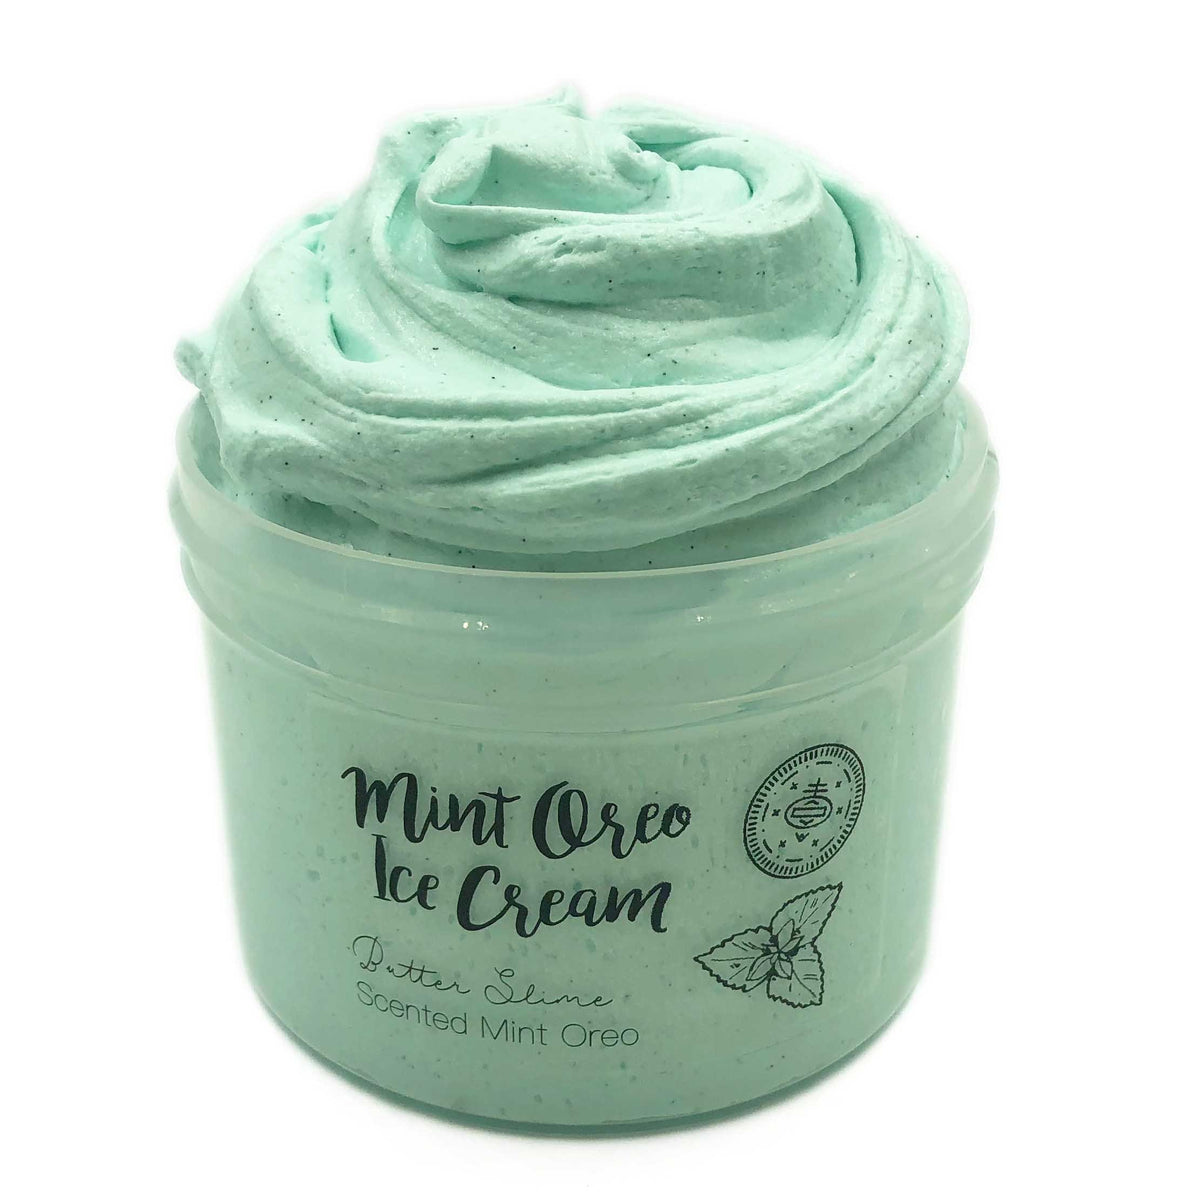 Mint Oreo Ice Cream Green Butter Slime Fantasies 8oz Front View